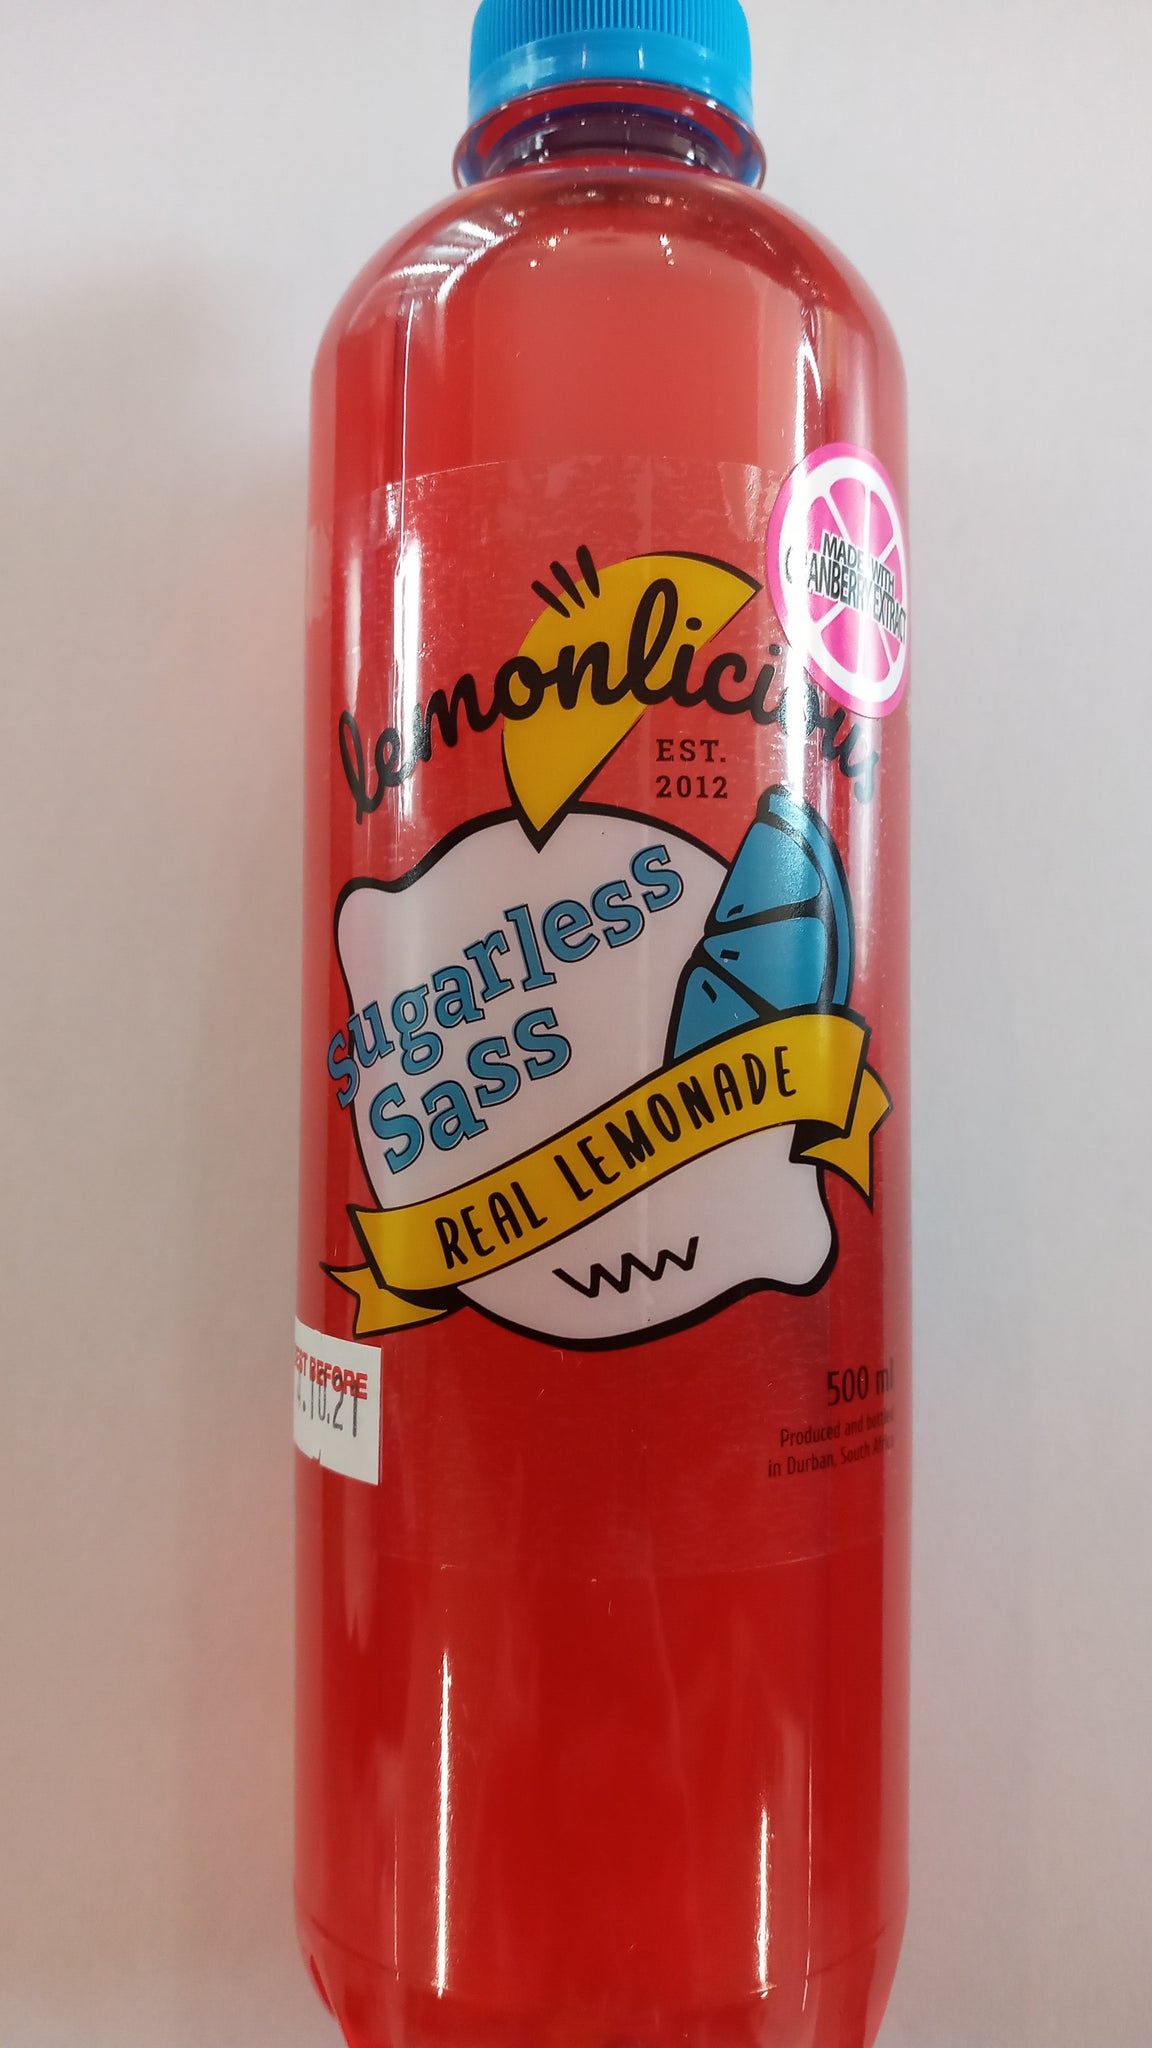 Lemonlicious Sugarless Lemonade with Cranberry extract 500ml